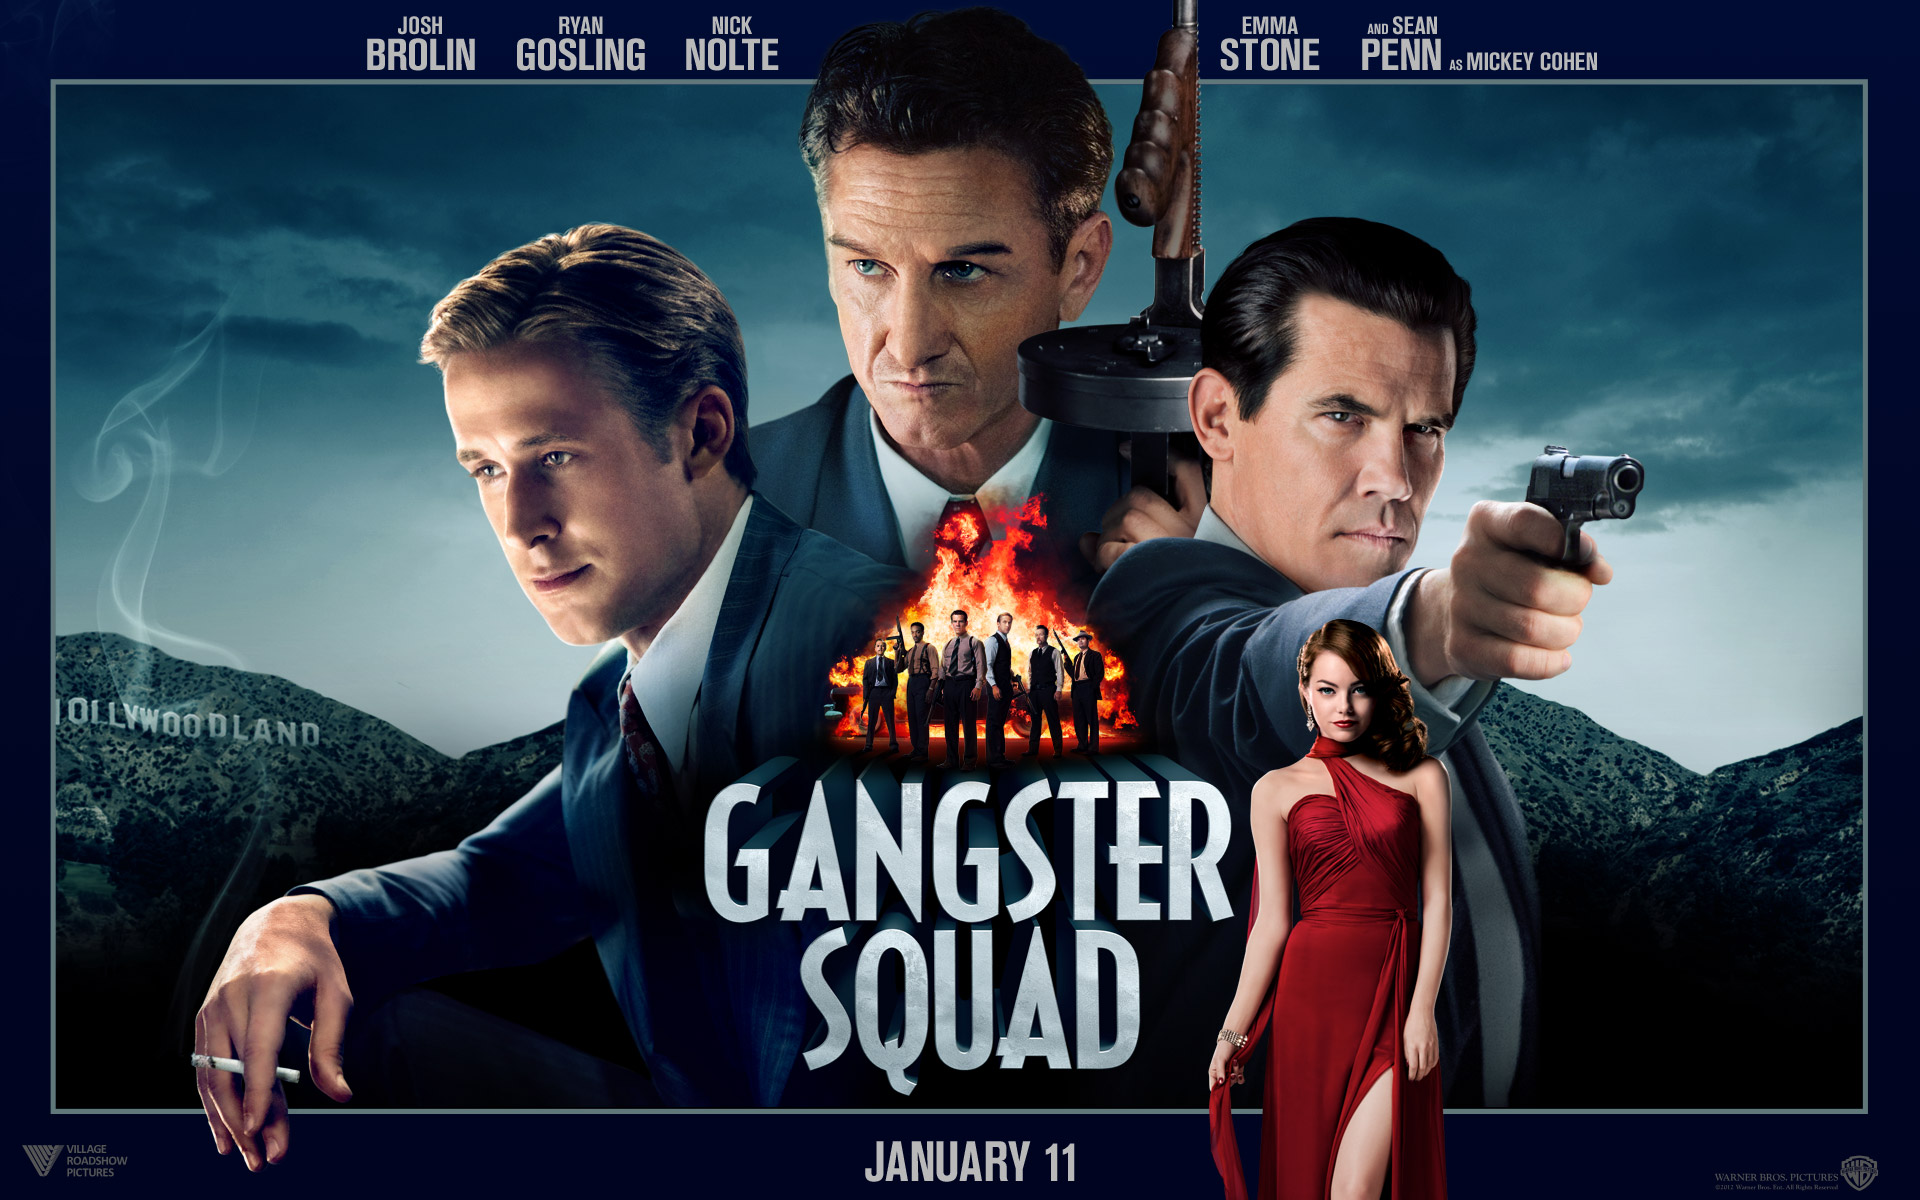 Downloads Gangster Squad - Official [HD] - Download Gangster Squad (2016) YIFY Torrent for 1080p 